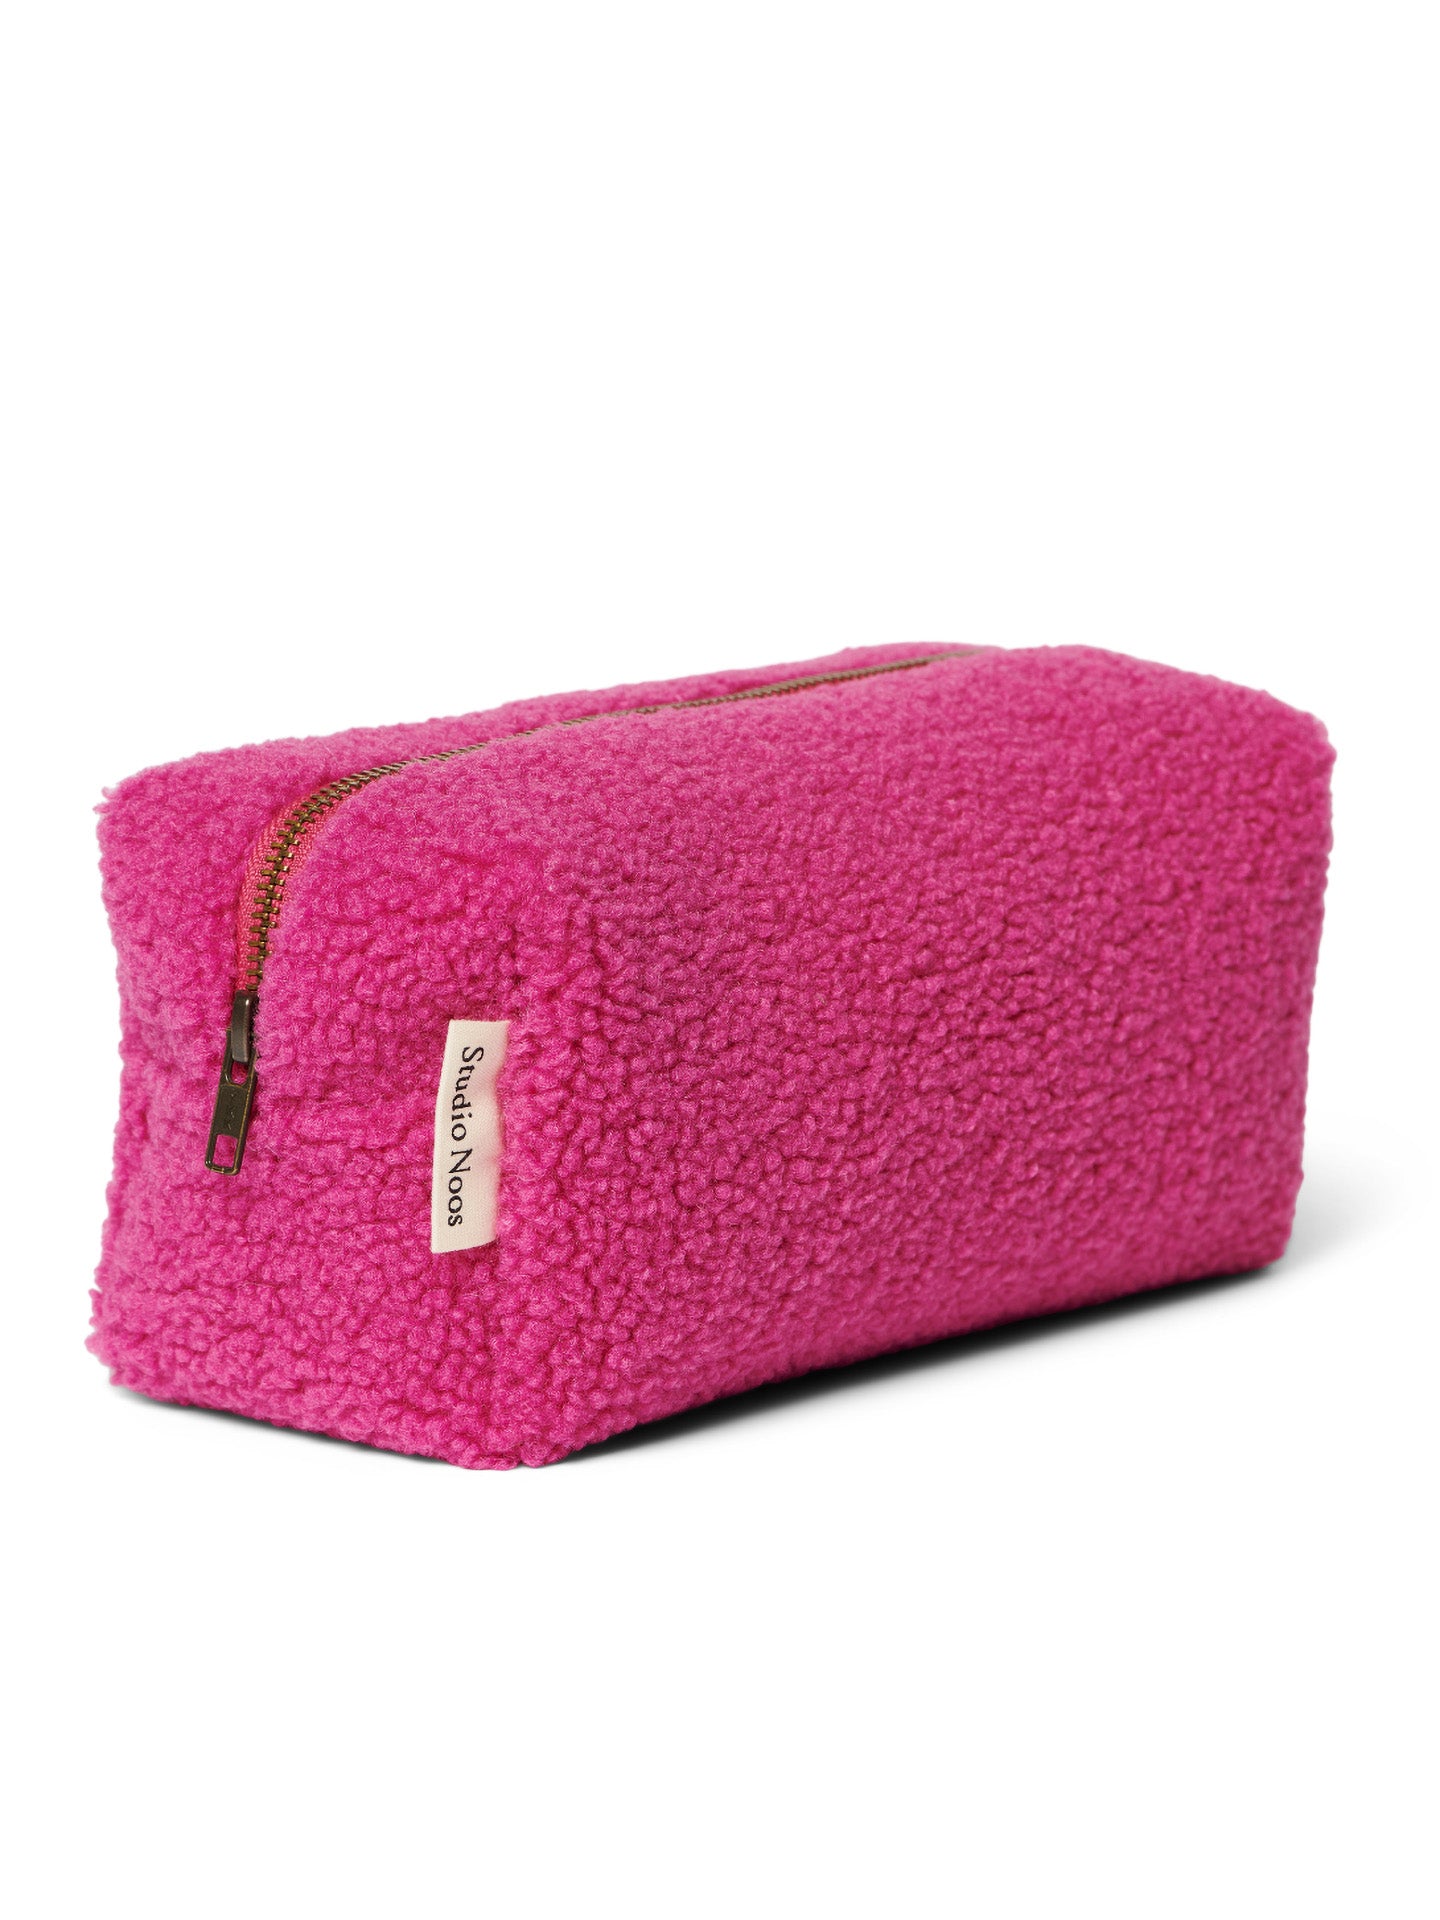 Teddy Pouch, 4 Colours